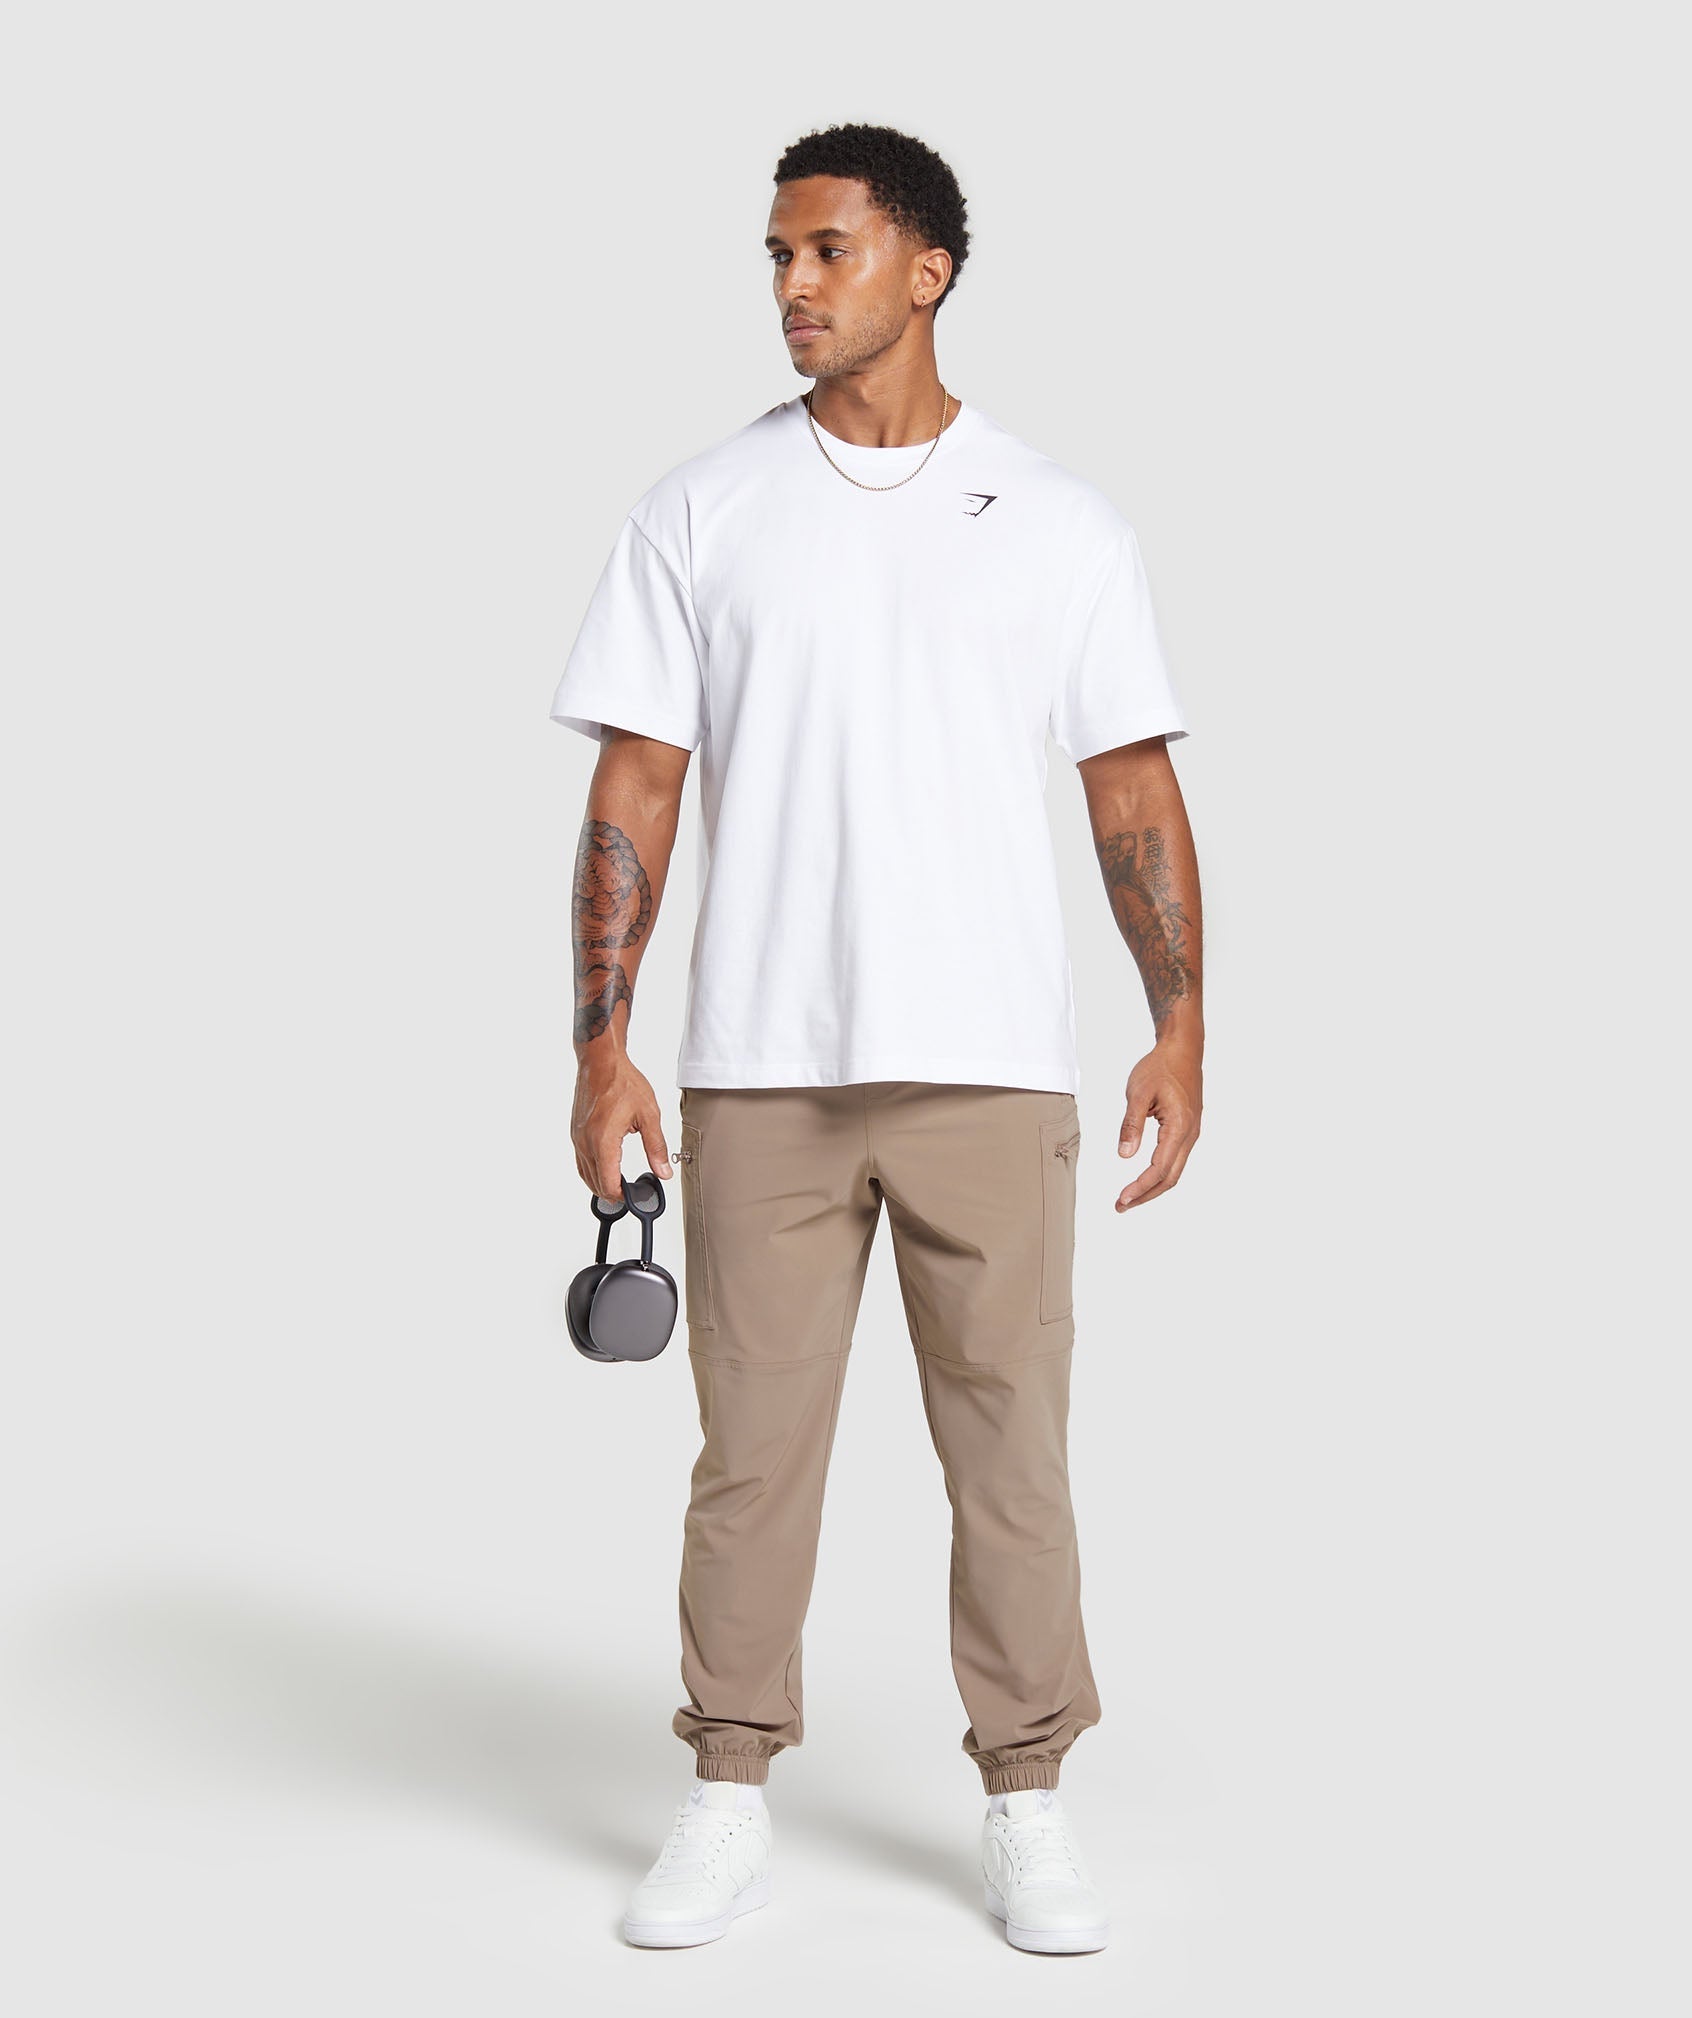 Rest Day Cargo Pants in Mocha Mauve - view 4